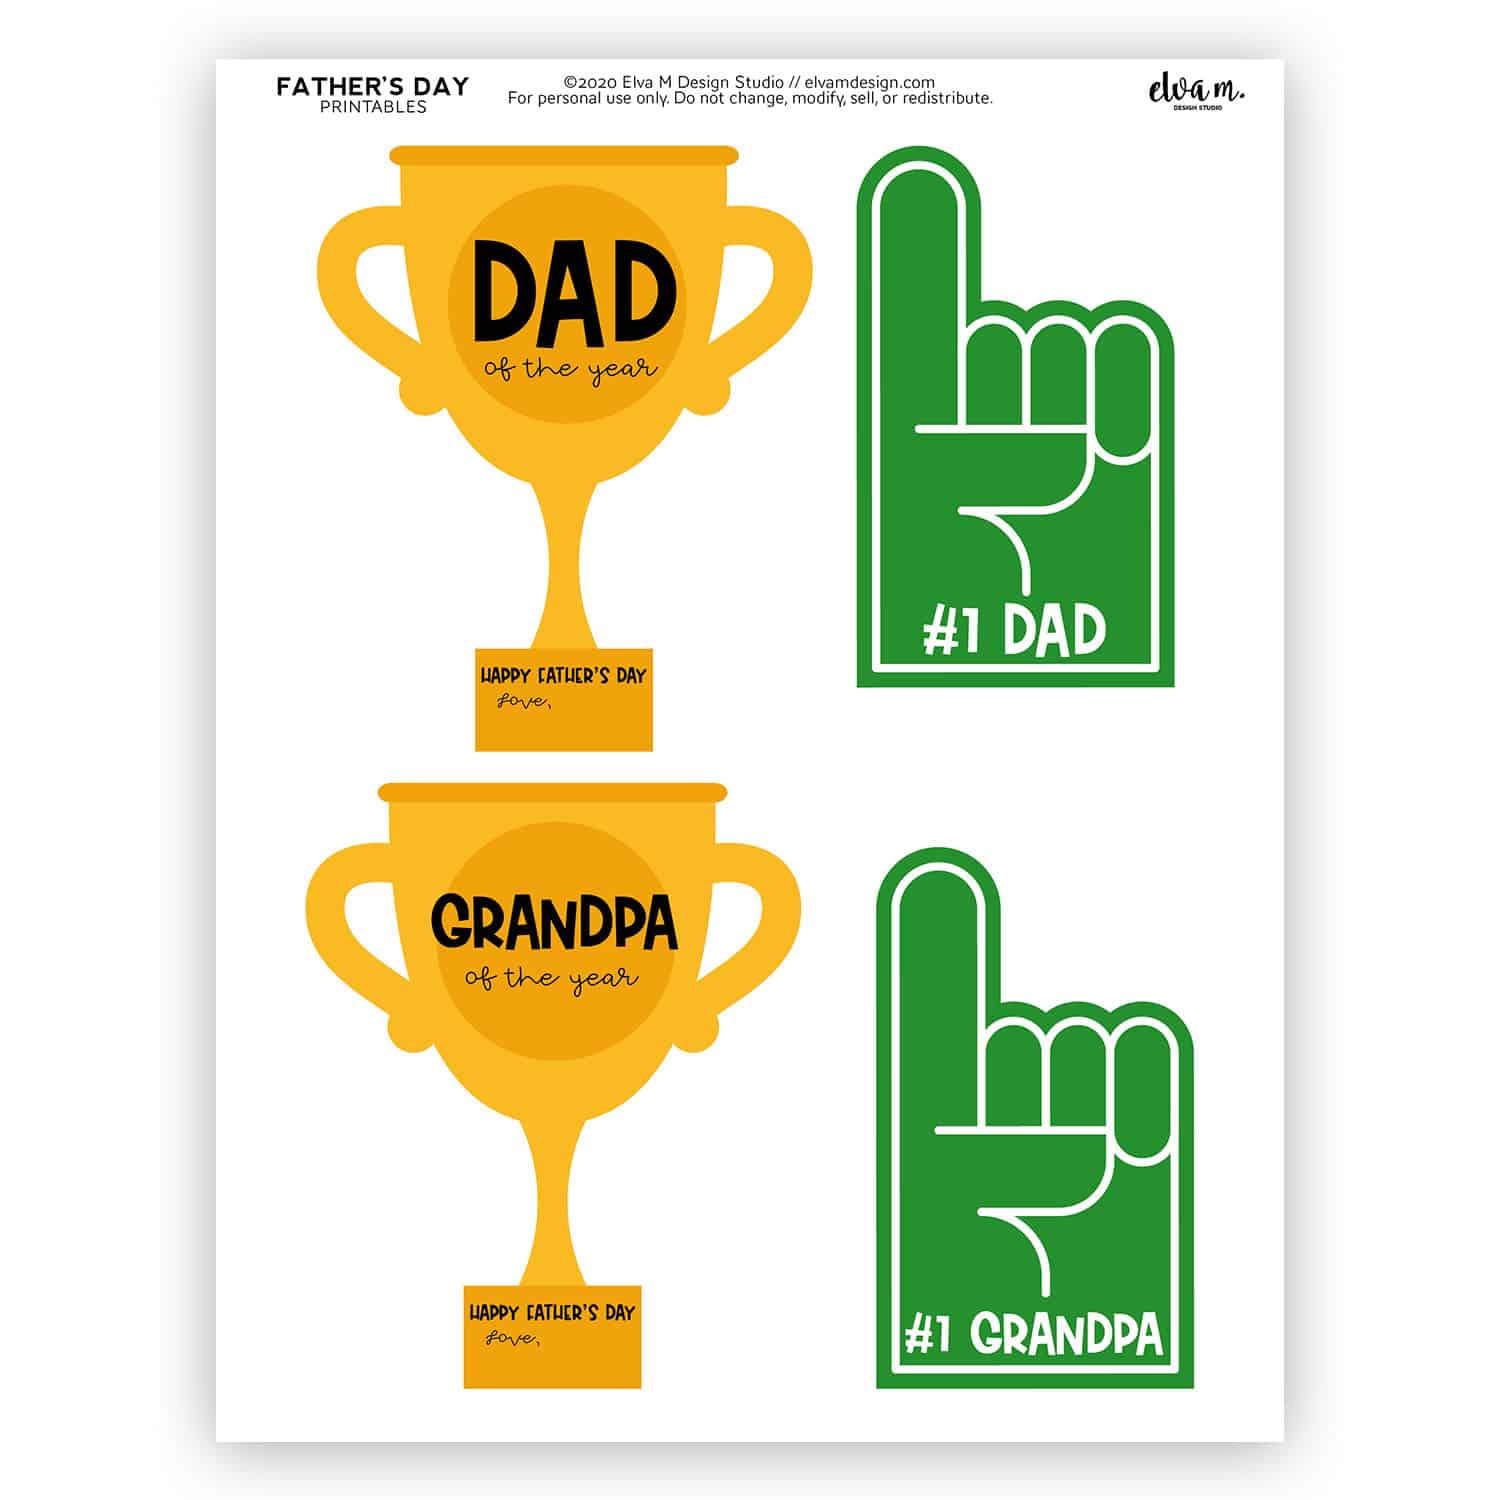 Dad of the Year Father's Day printable